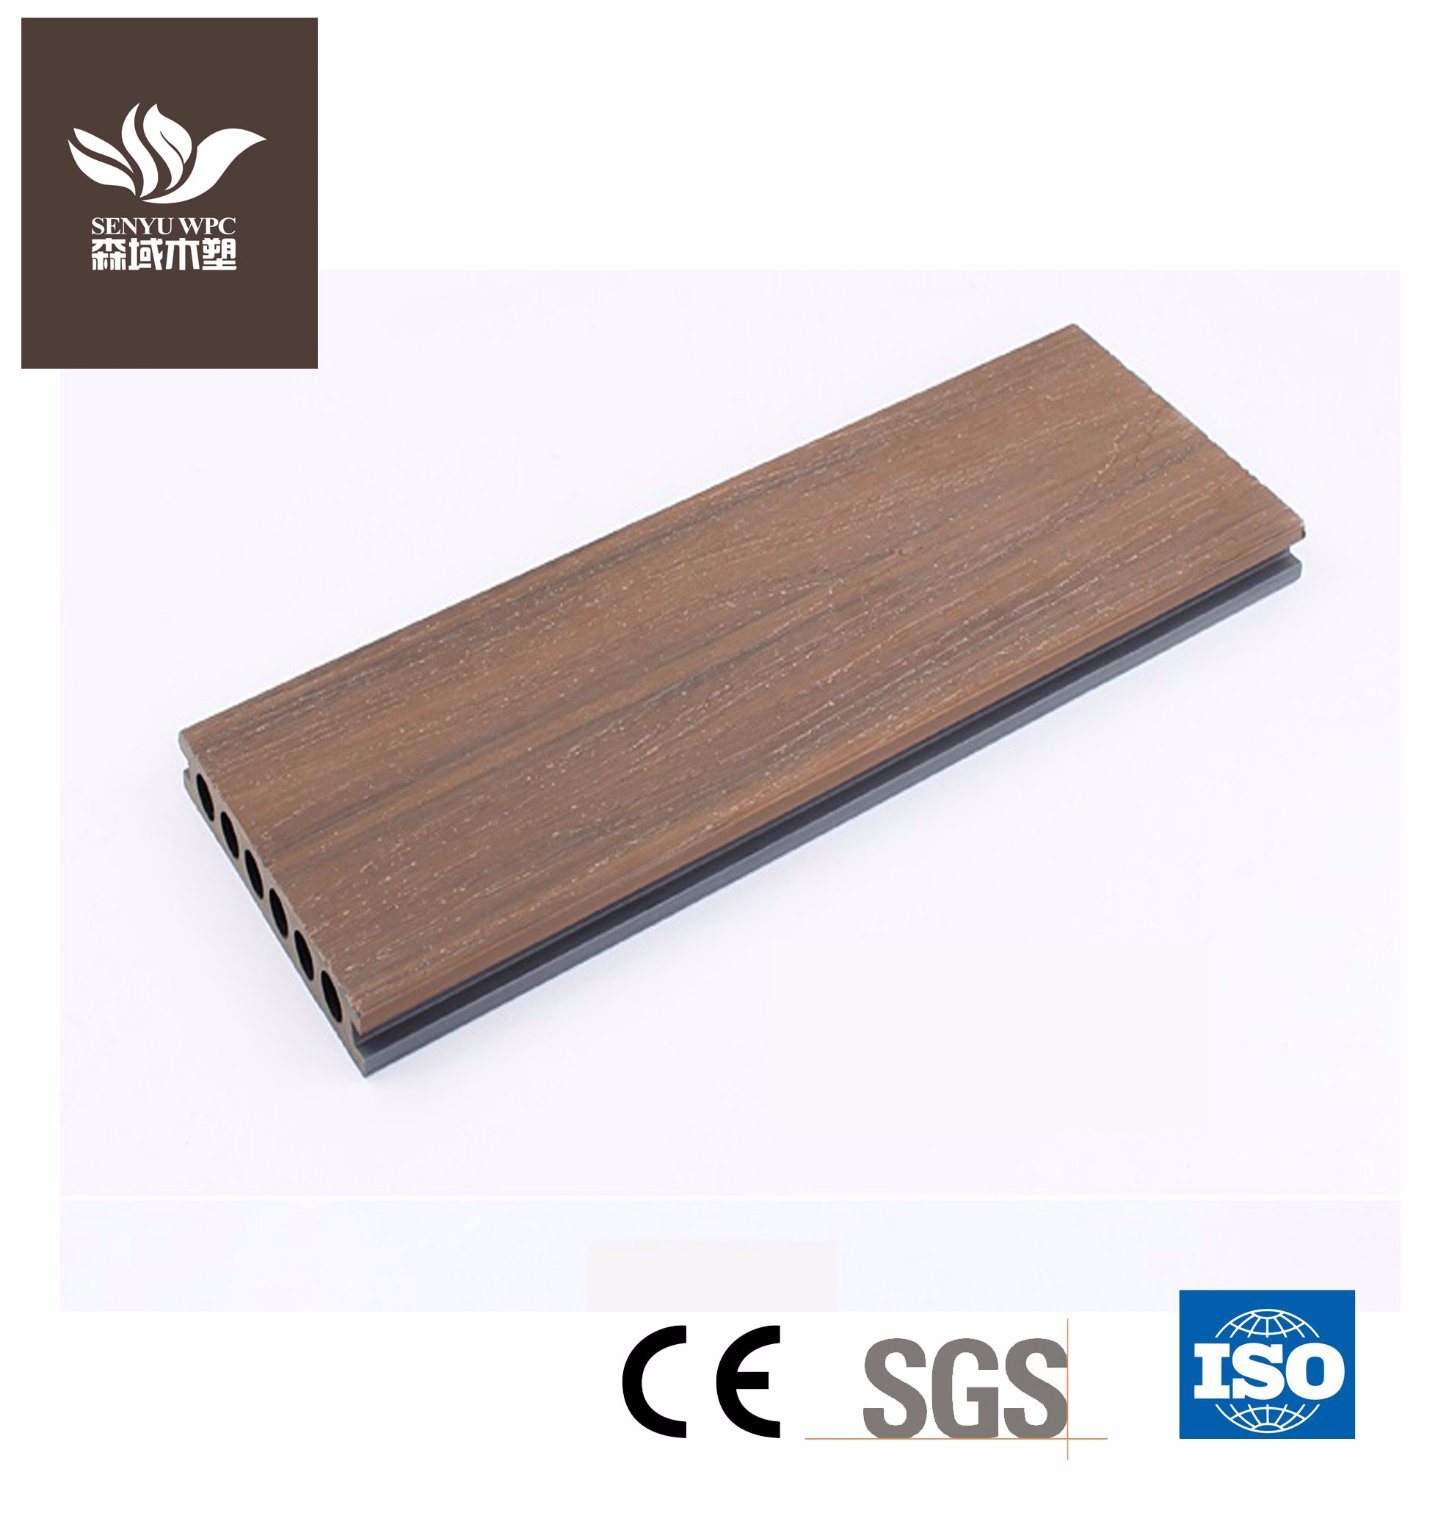 Co-Extrusion WPC Wood Plastic Composite Decking for Outdoor